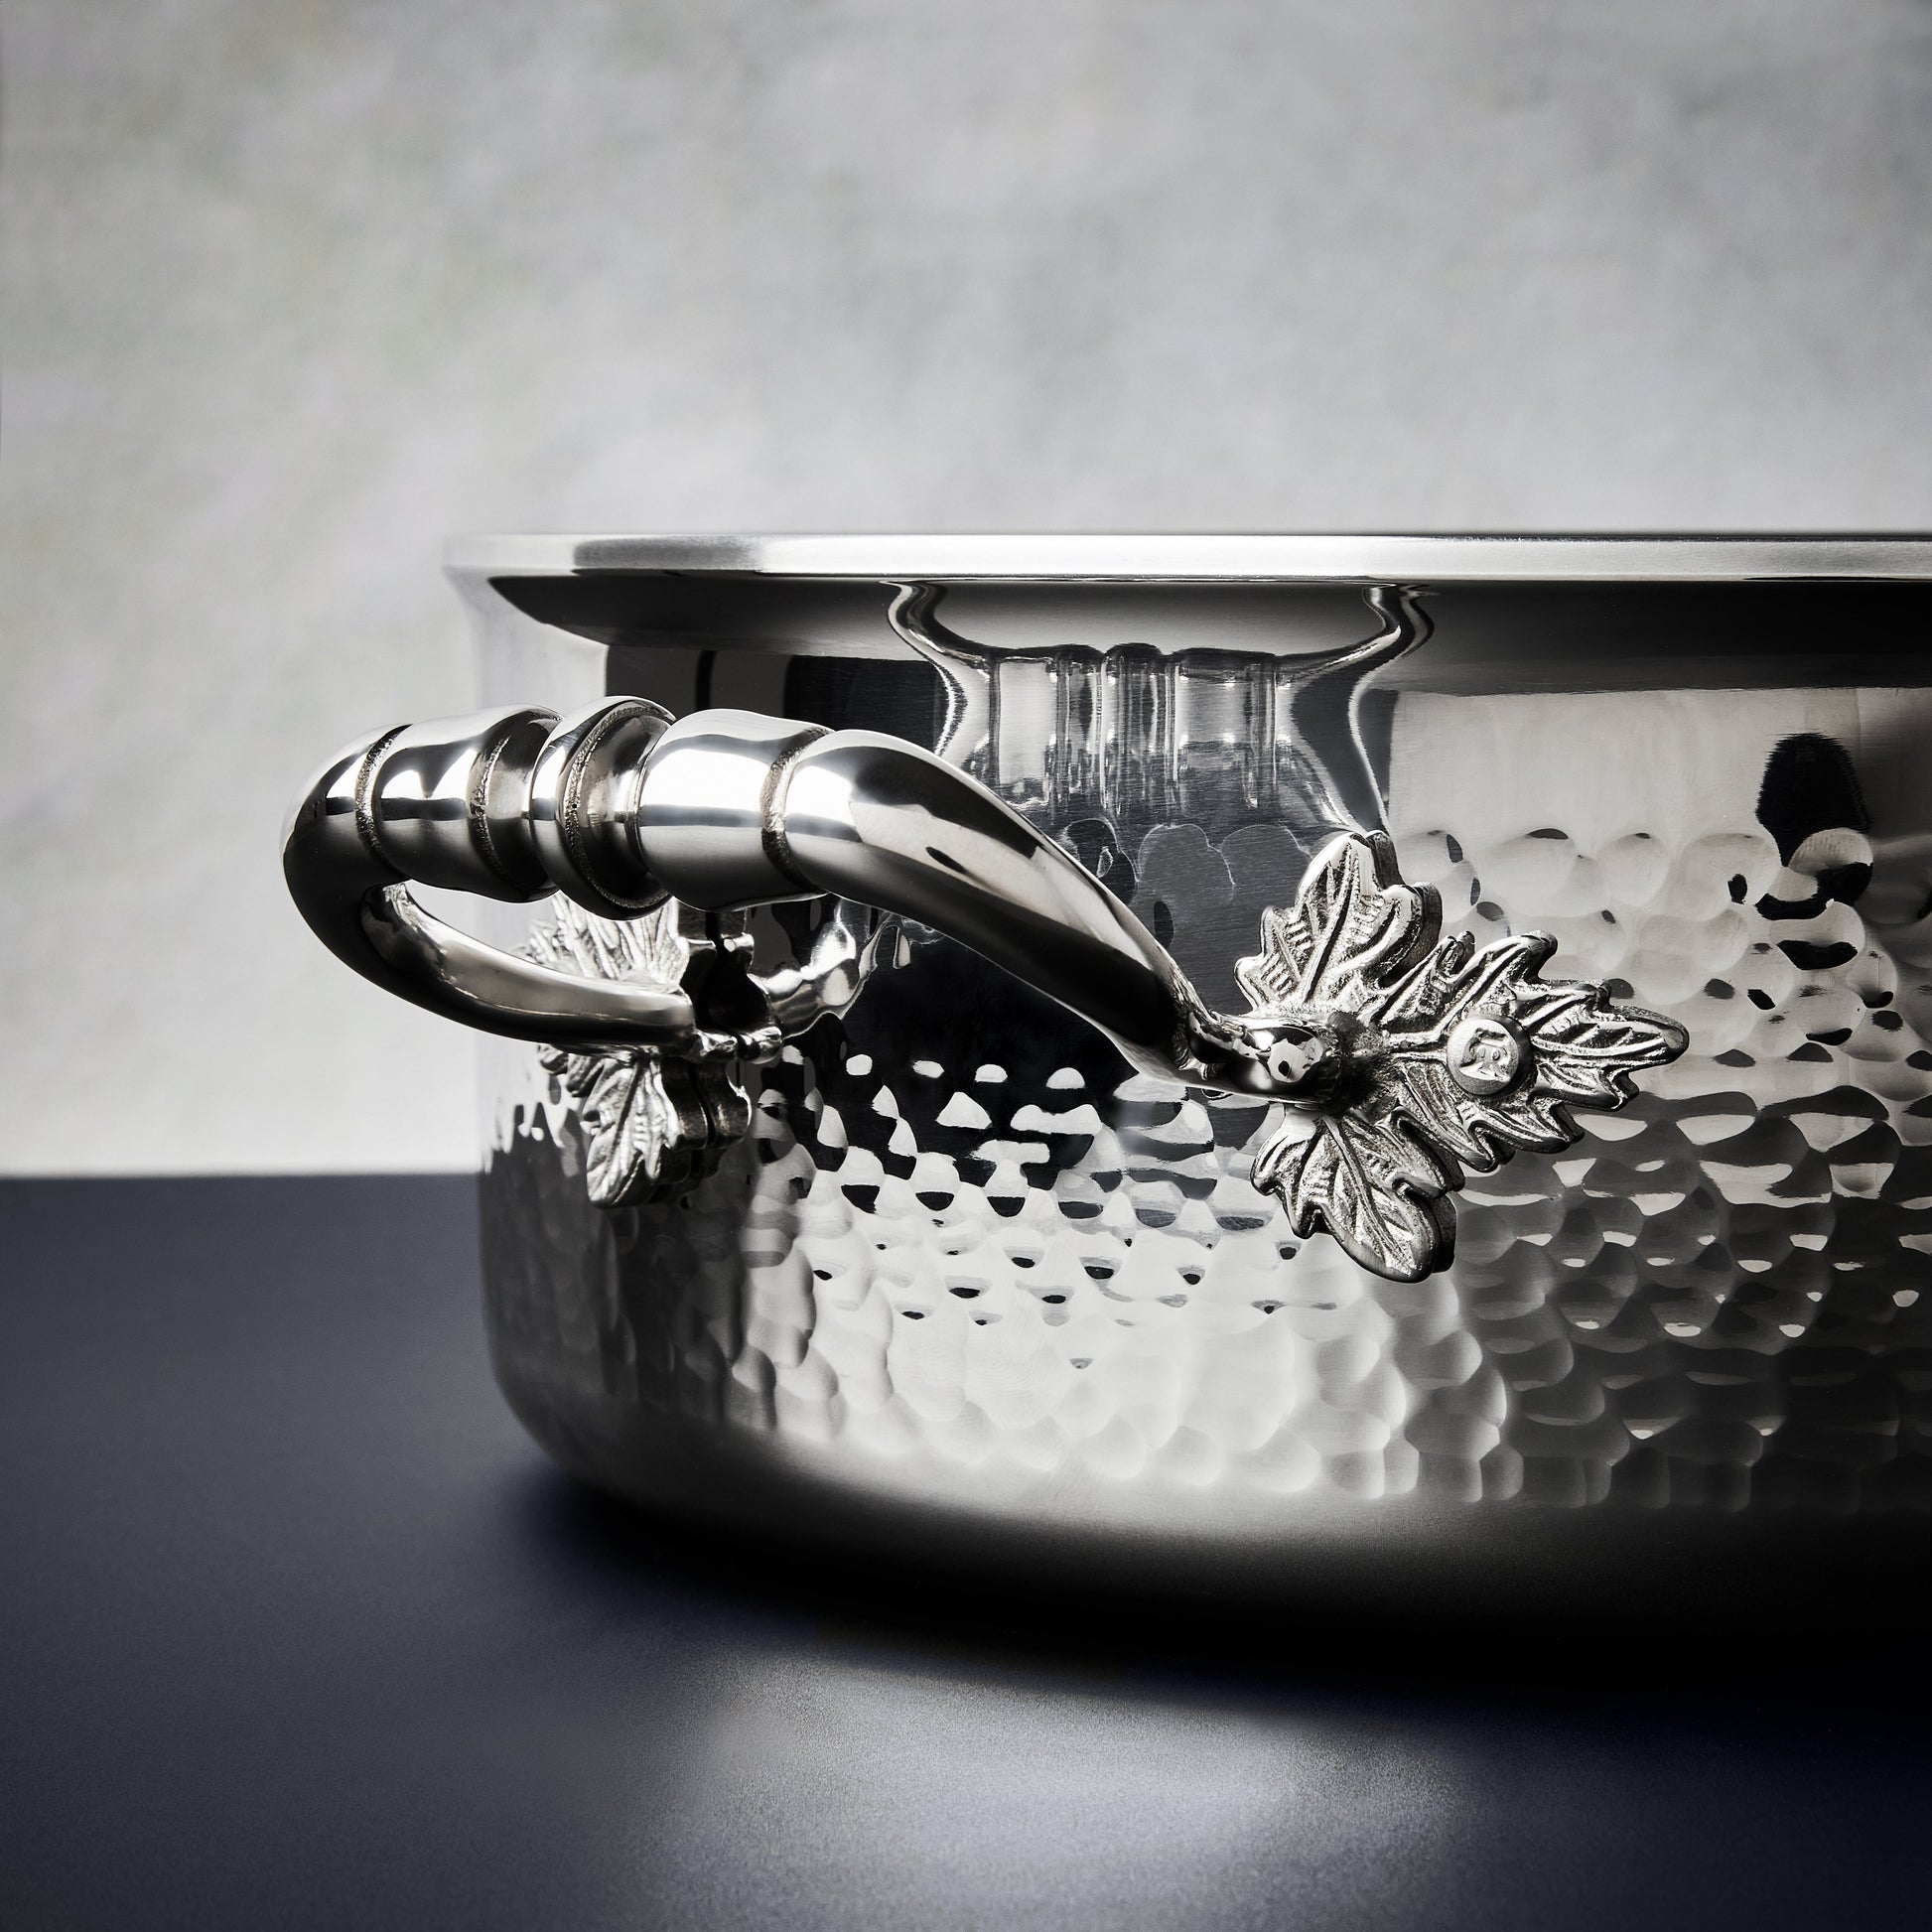 Beautiful stainless steel handle decorated with delicate leaves on Opus Prima cookware by Ruffoni